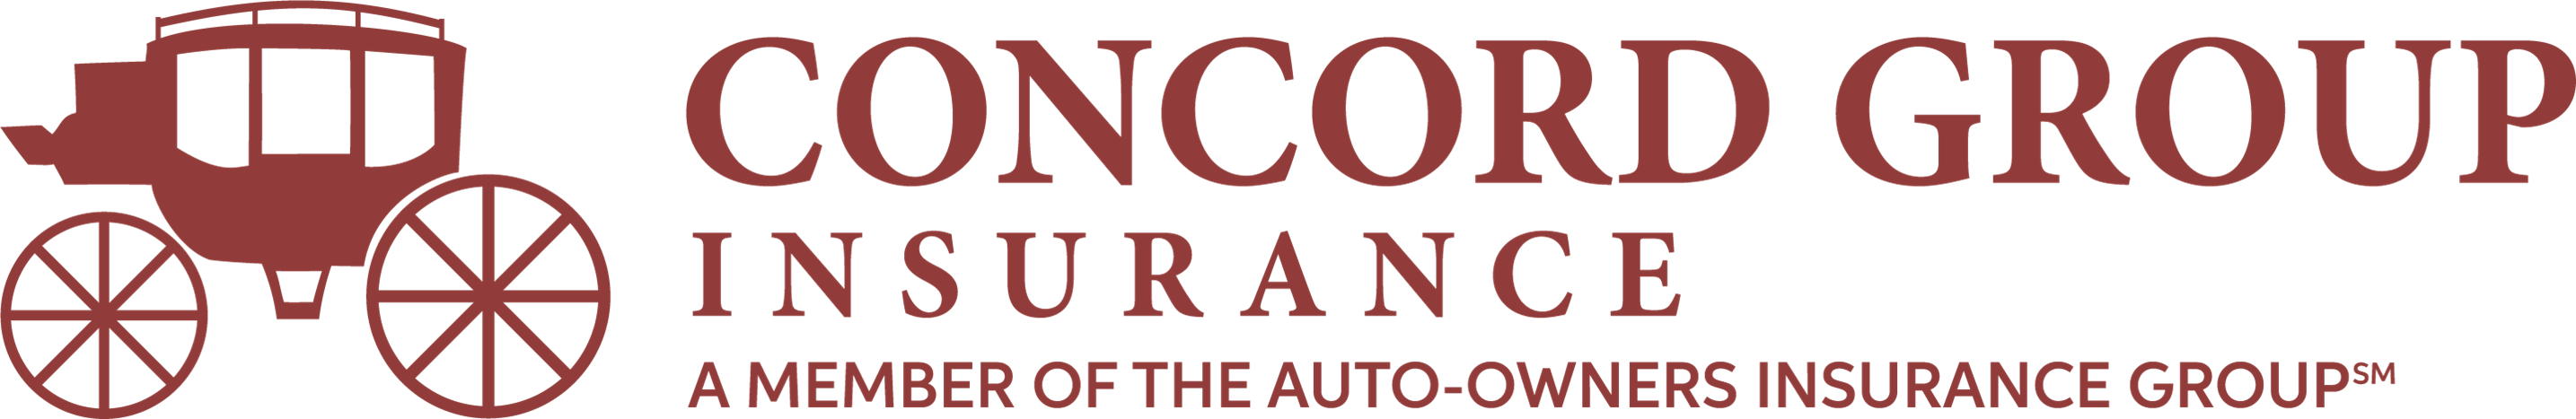 Concord Logo.png